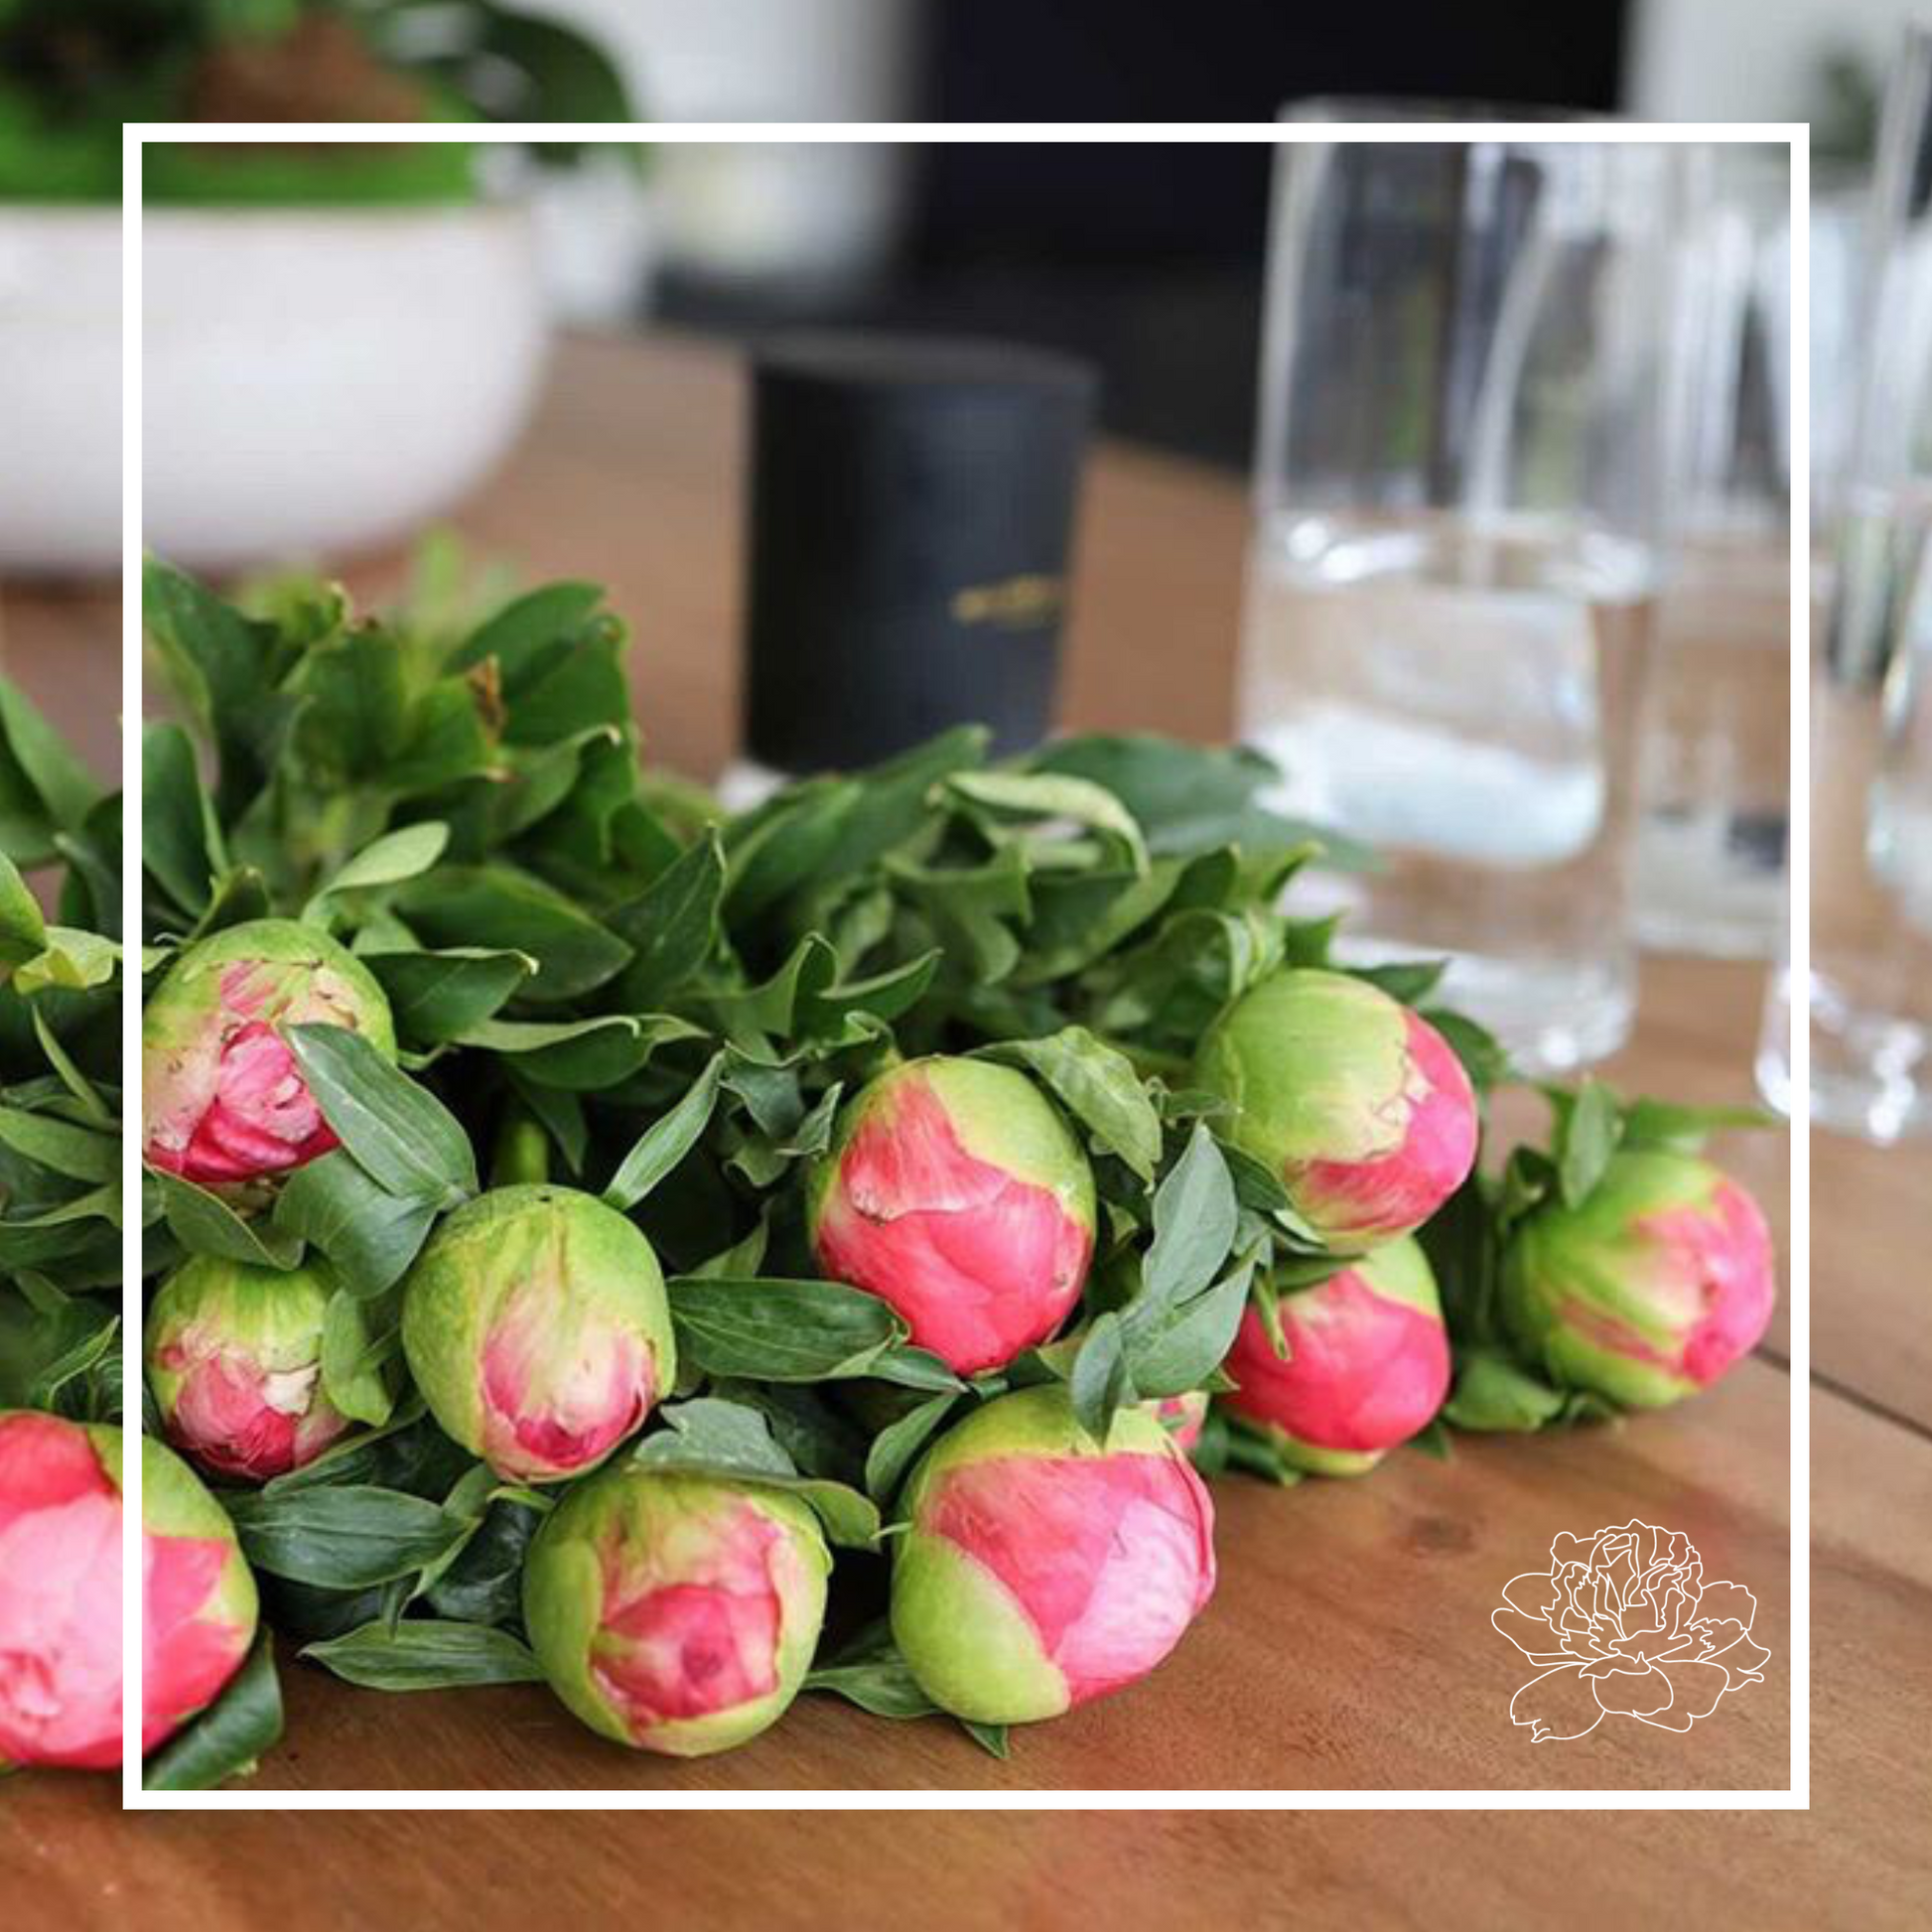 ten peonies still in buds lying on a kitchen table. the buds are facing forward and green foliage surround them. the background is blurred but you can see glasses and a candle in the background. Framed with a white graphic and the prebbleton peonies logo in the bottom right corner.